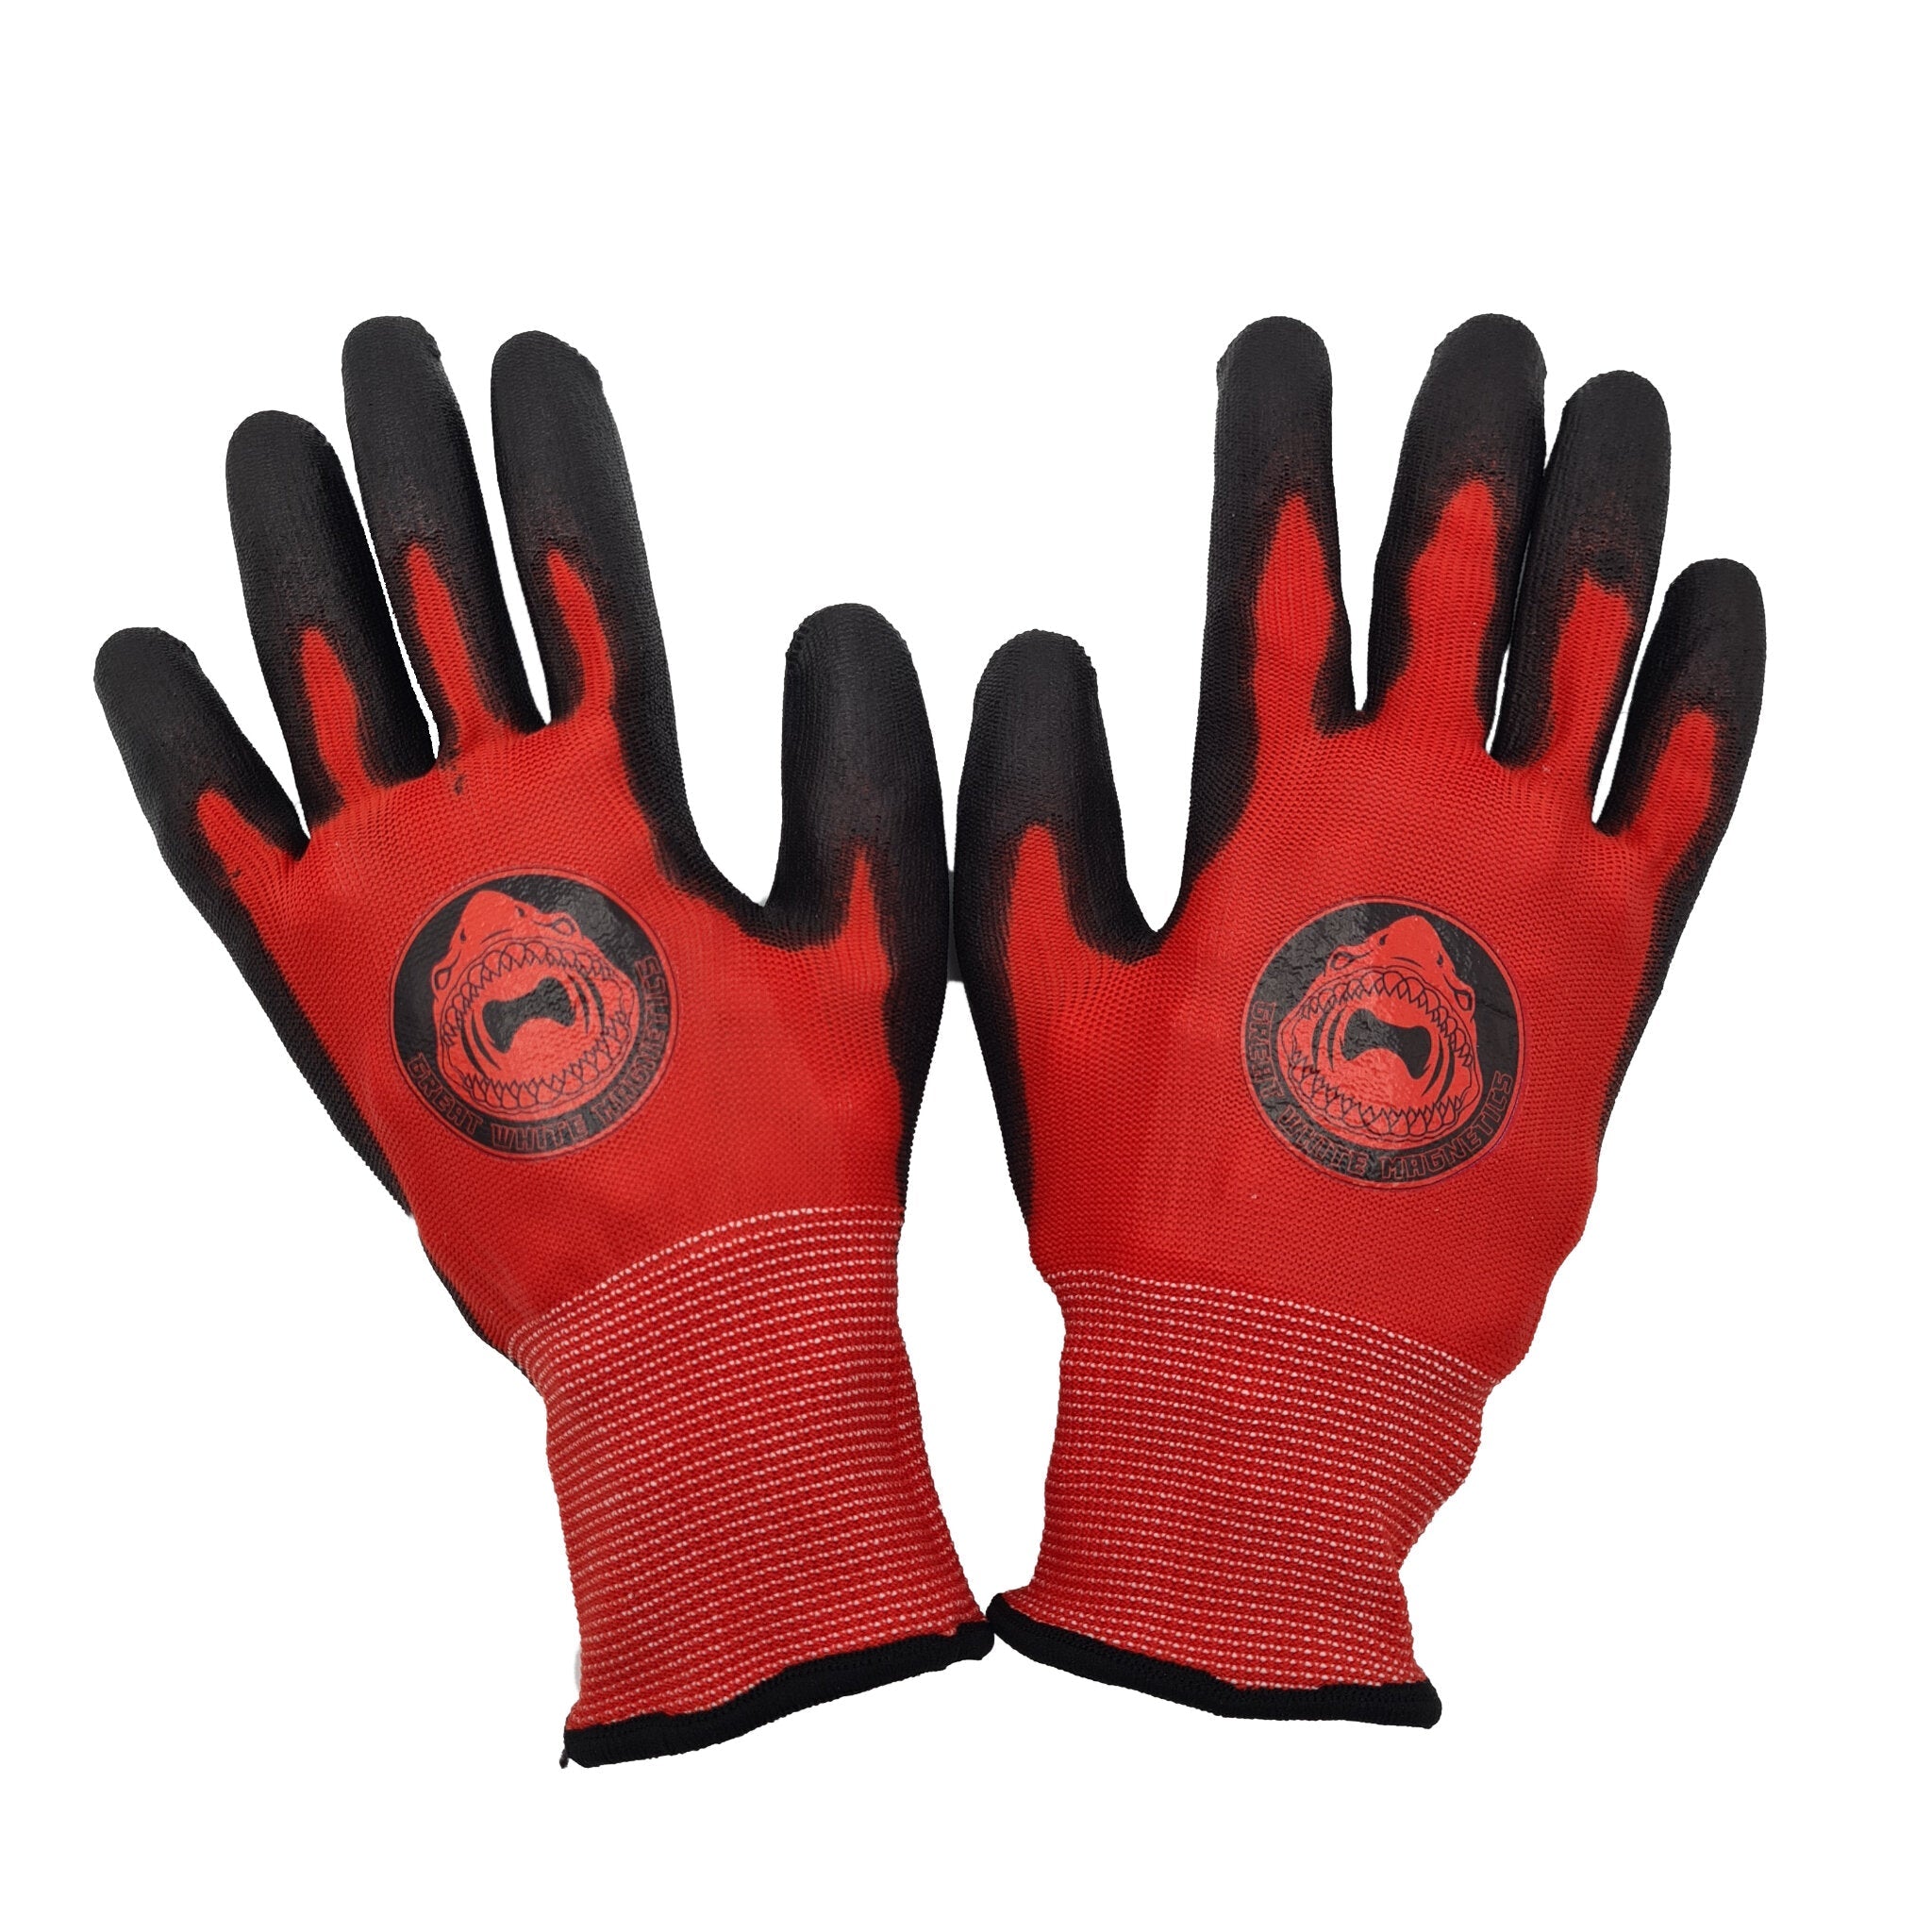 Protective Magnet Fishing Gloves